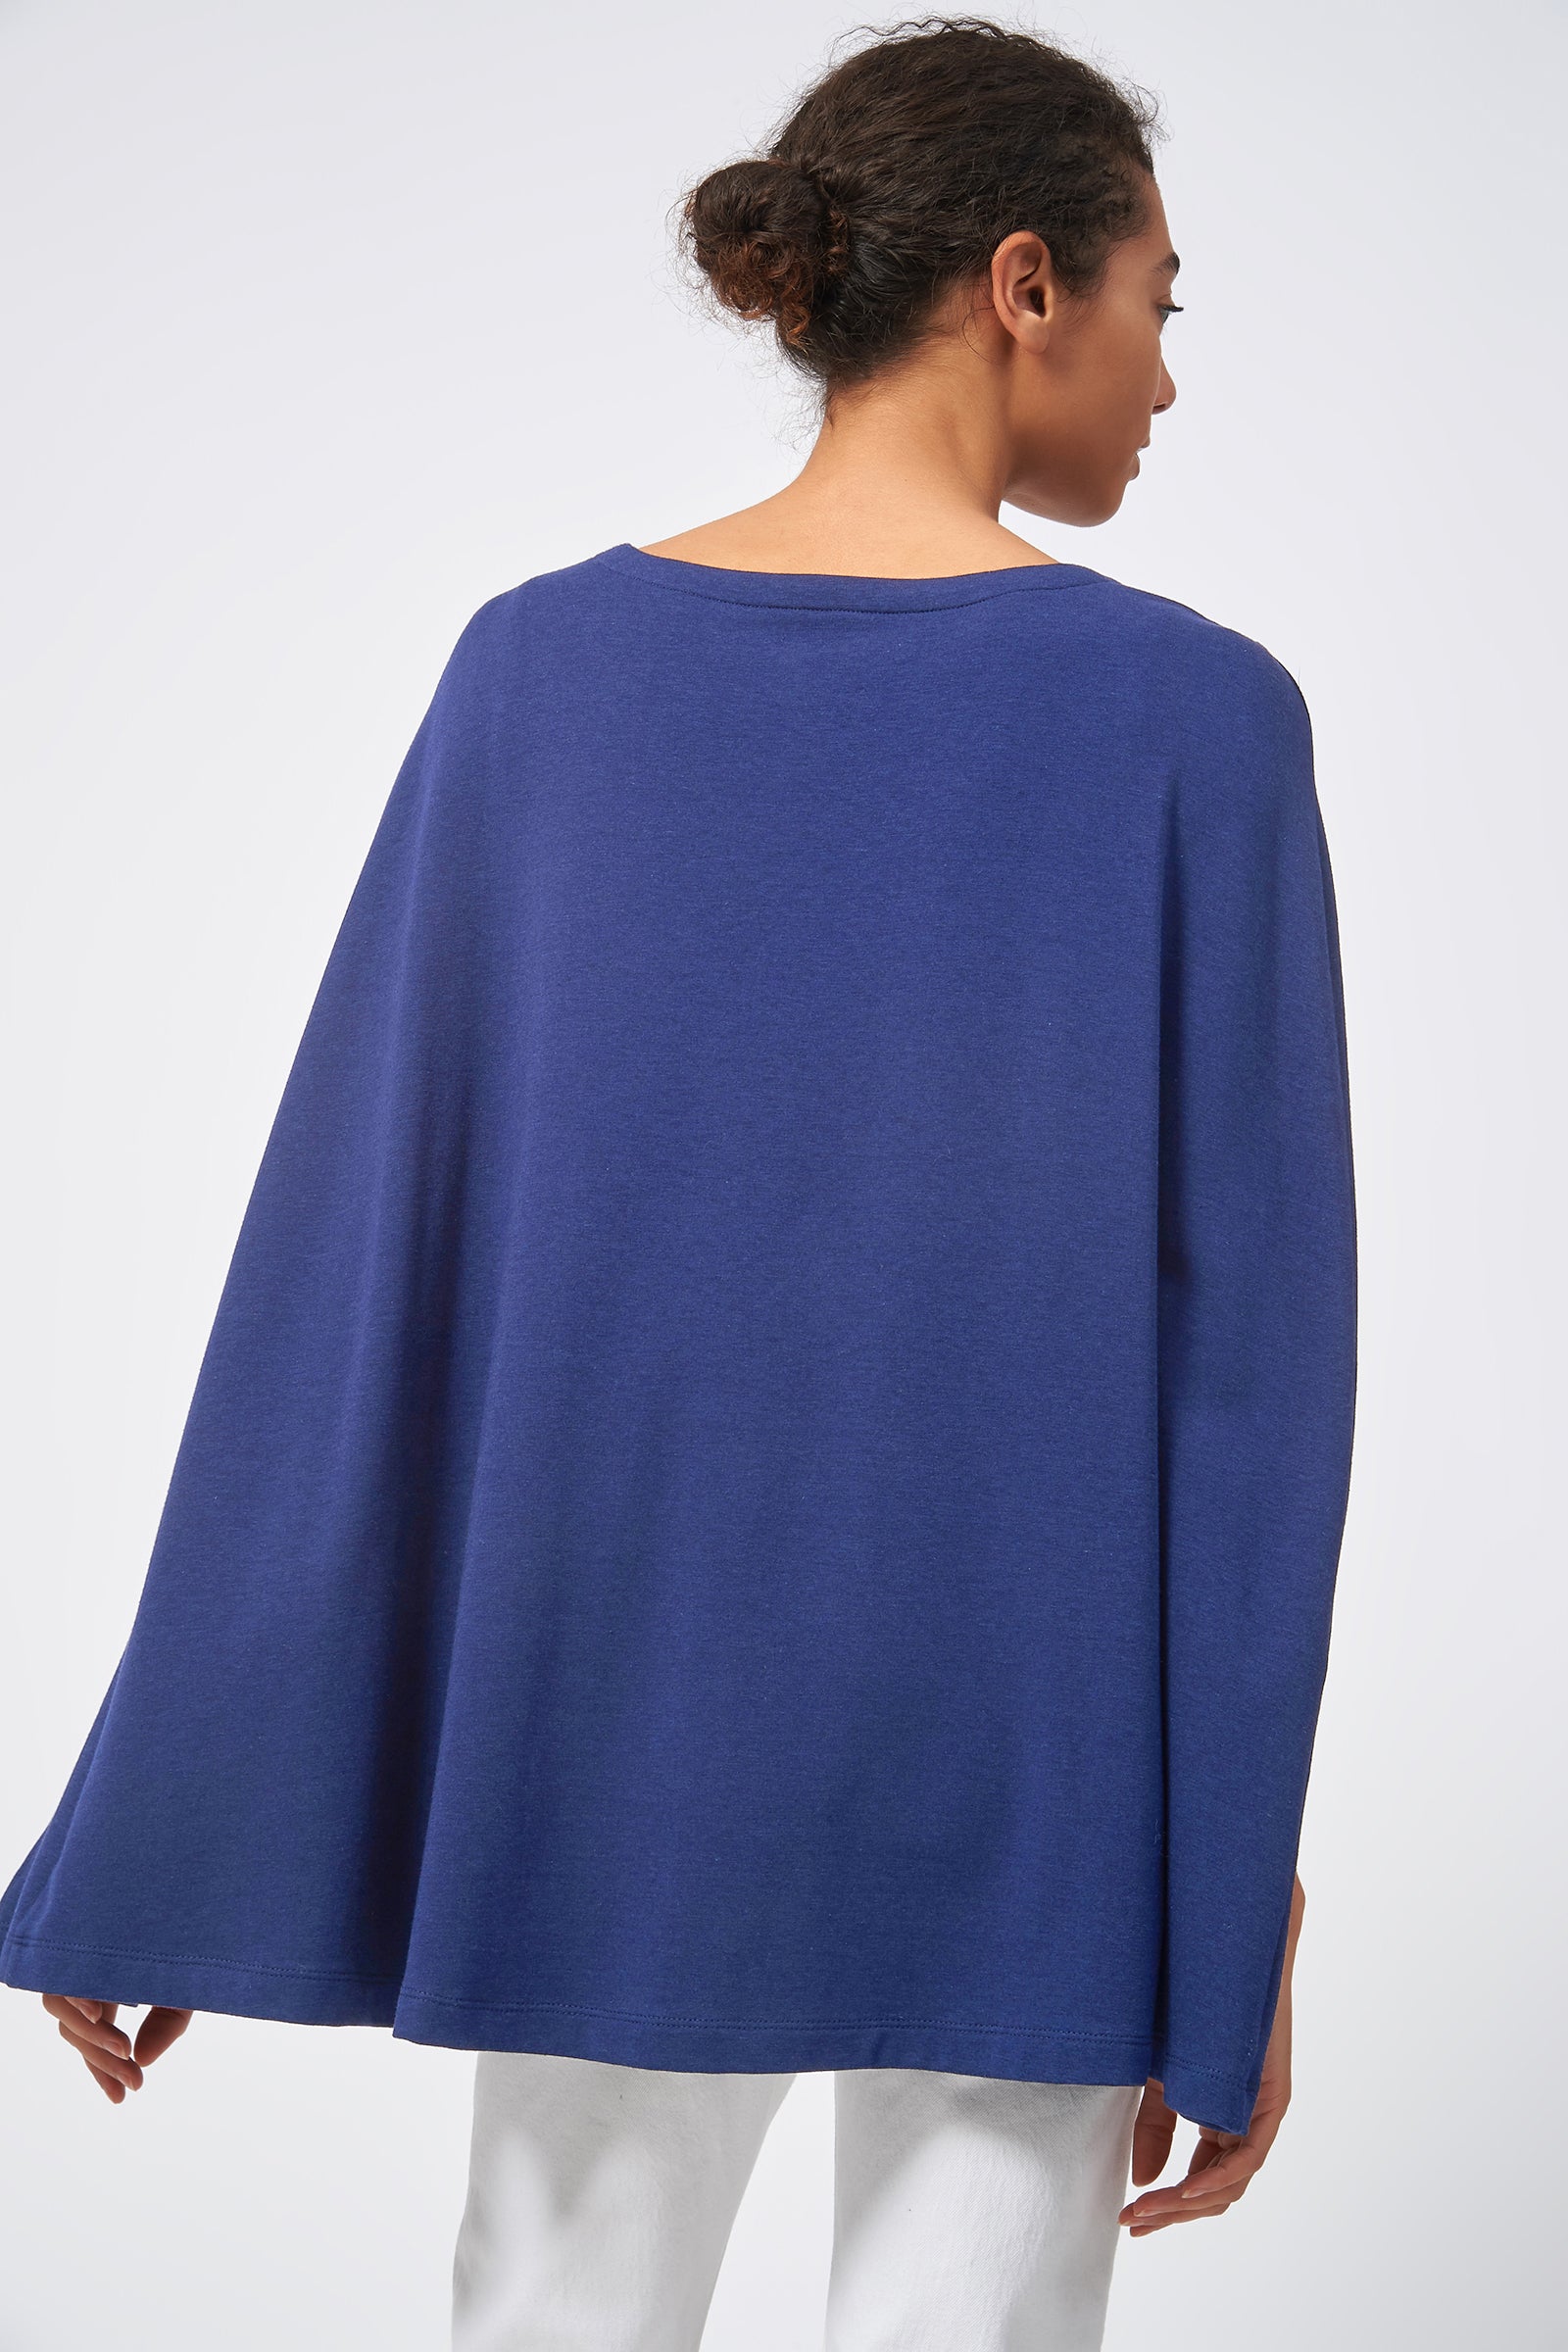 Kal Rieman Cape Sweatshirt in Bamboo Terry Blue image of the main back view